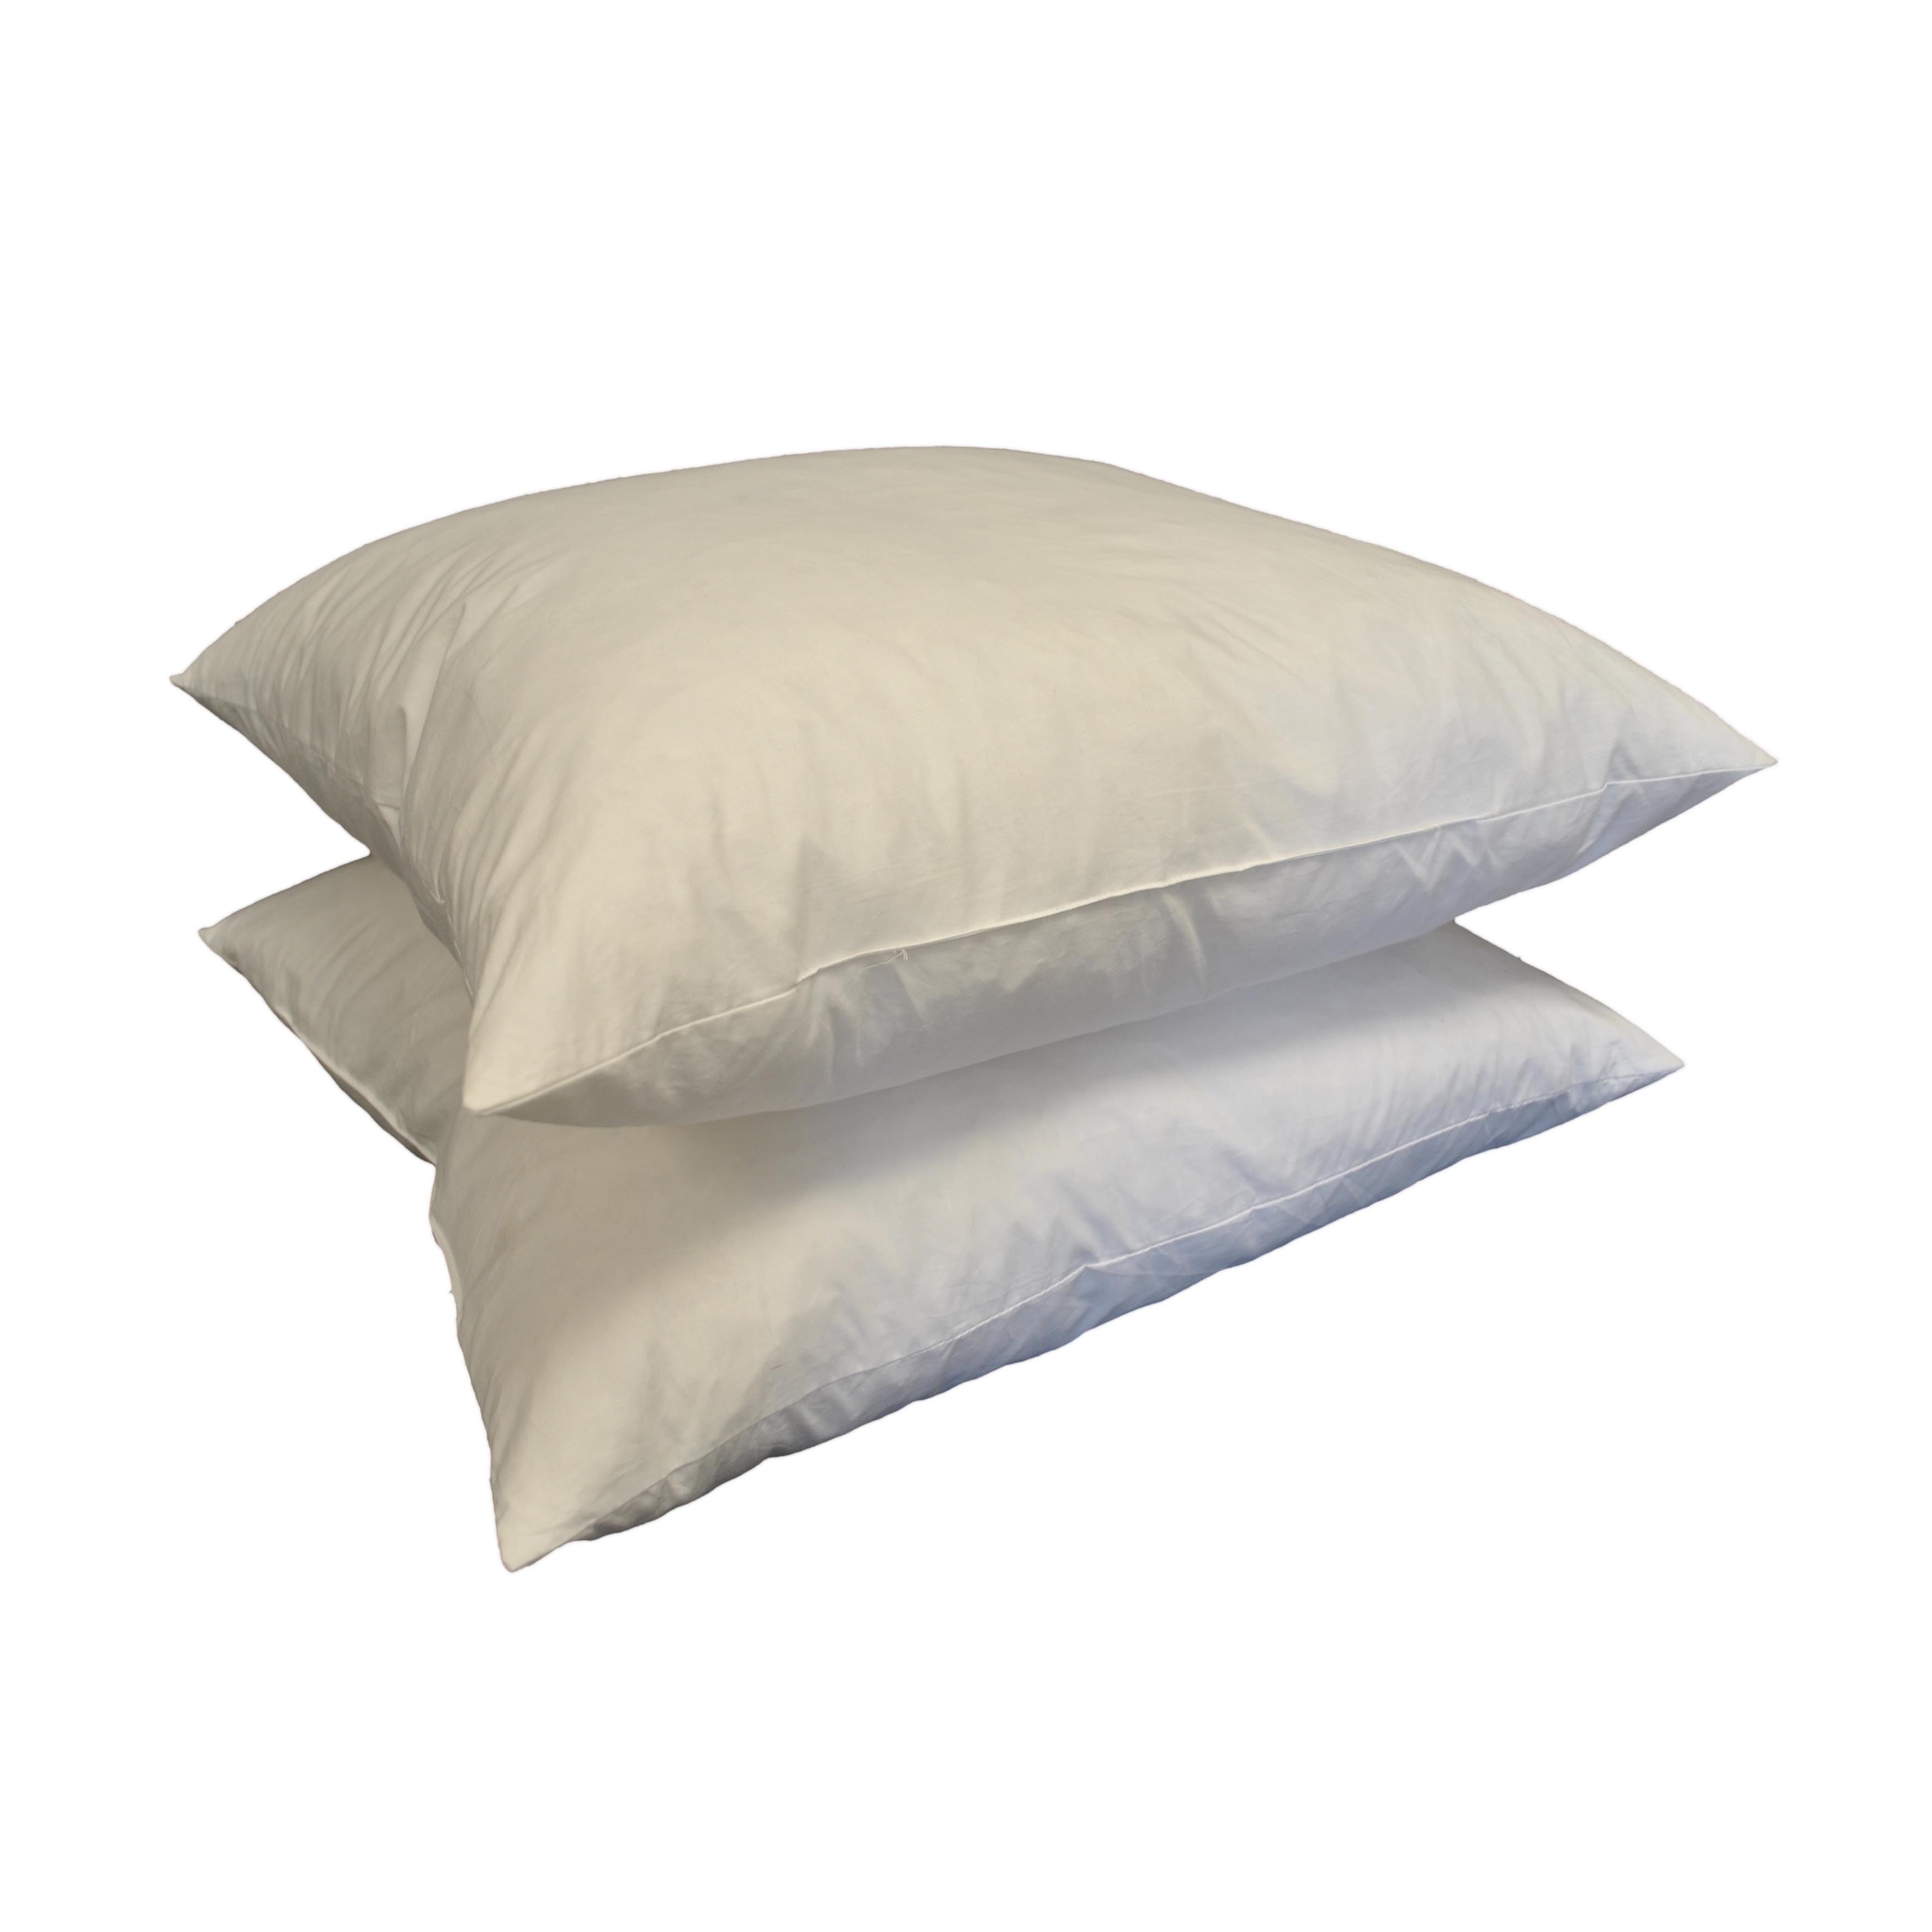 https://ak1.ostkcdn.com/images/products/8419133/8419133/21-inch-Square-Feather-Pillow-Insert-Set-of-2-L15717520.jpg